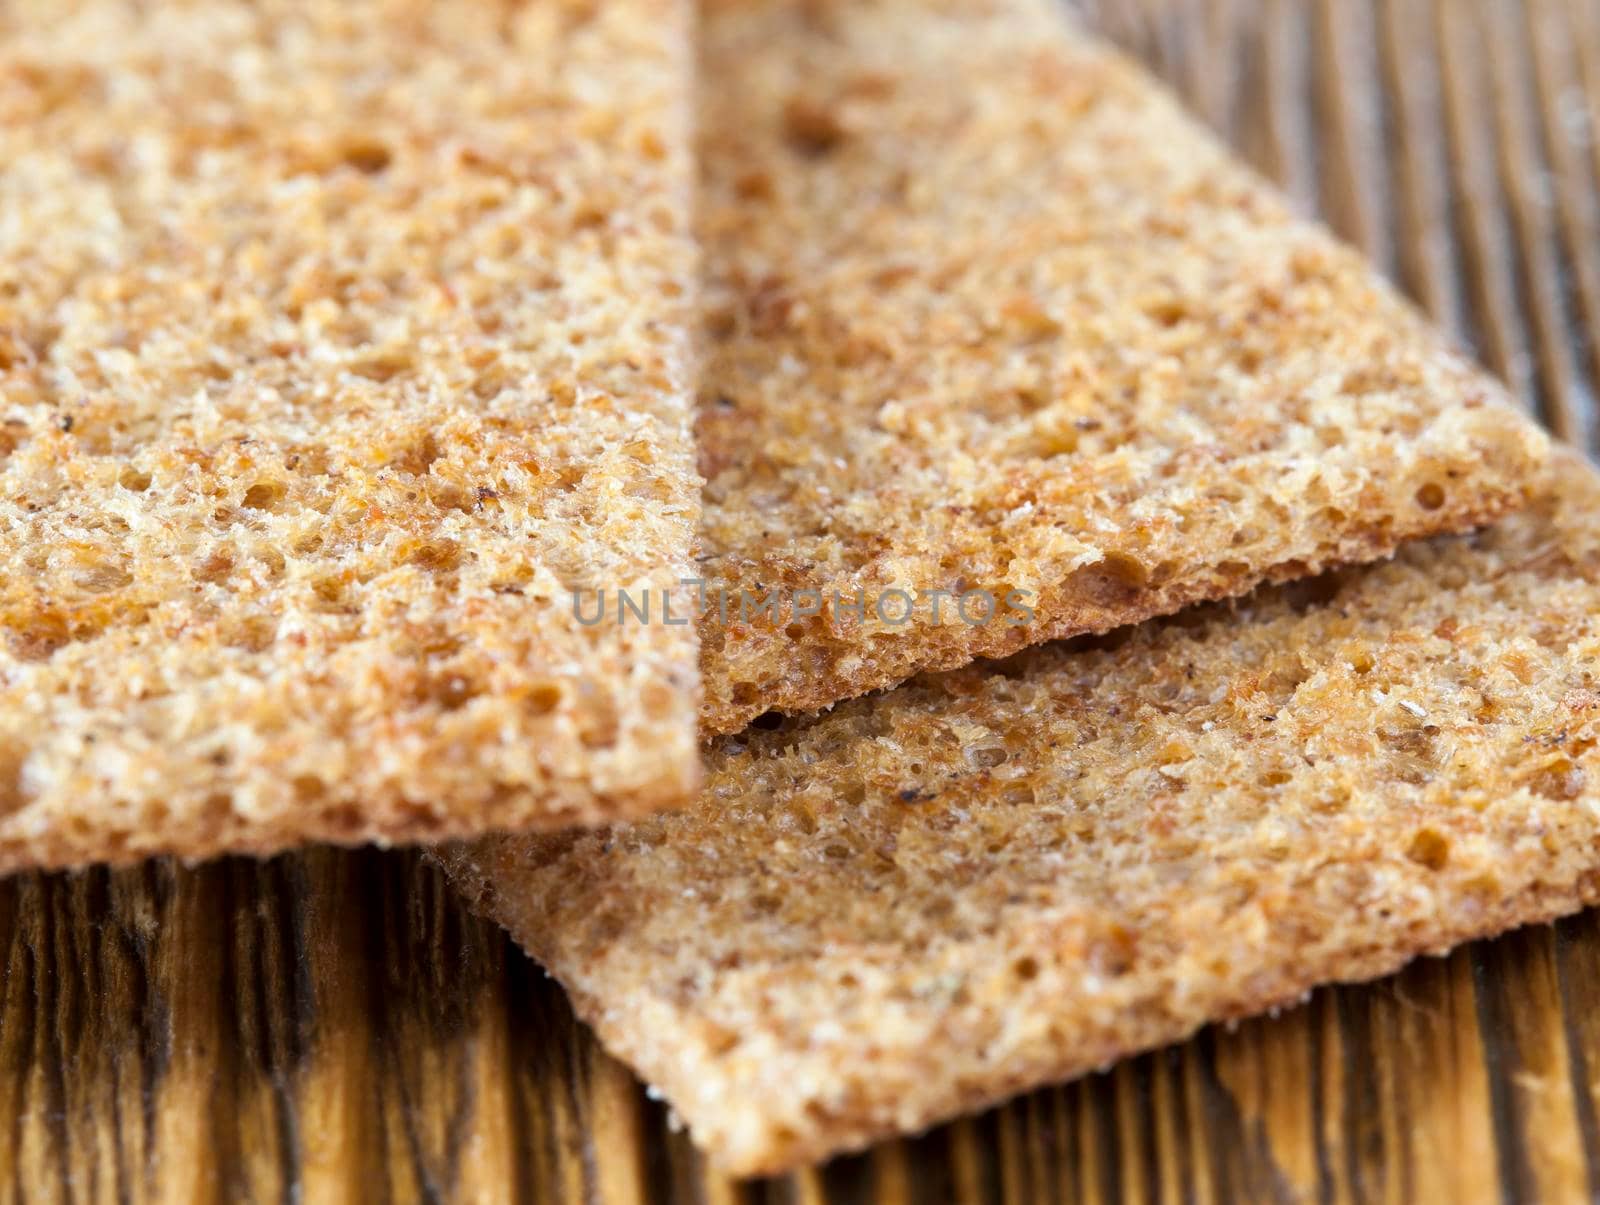 thin dry bread from rye flour, ready to eat, closeup meal on a wooden table